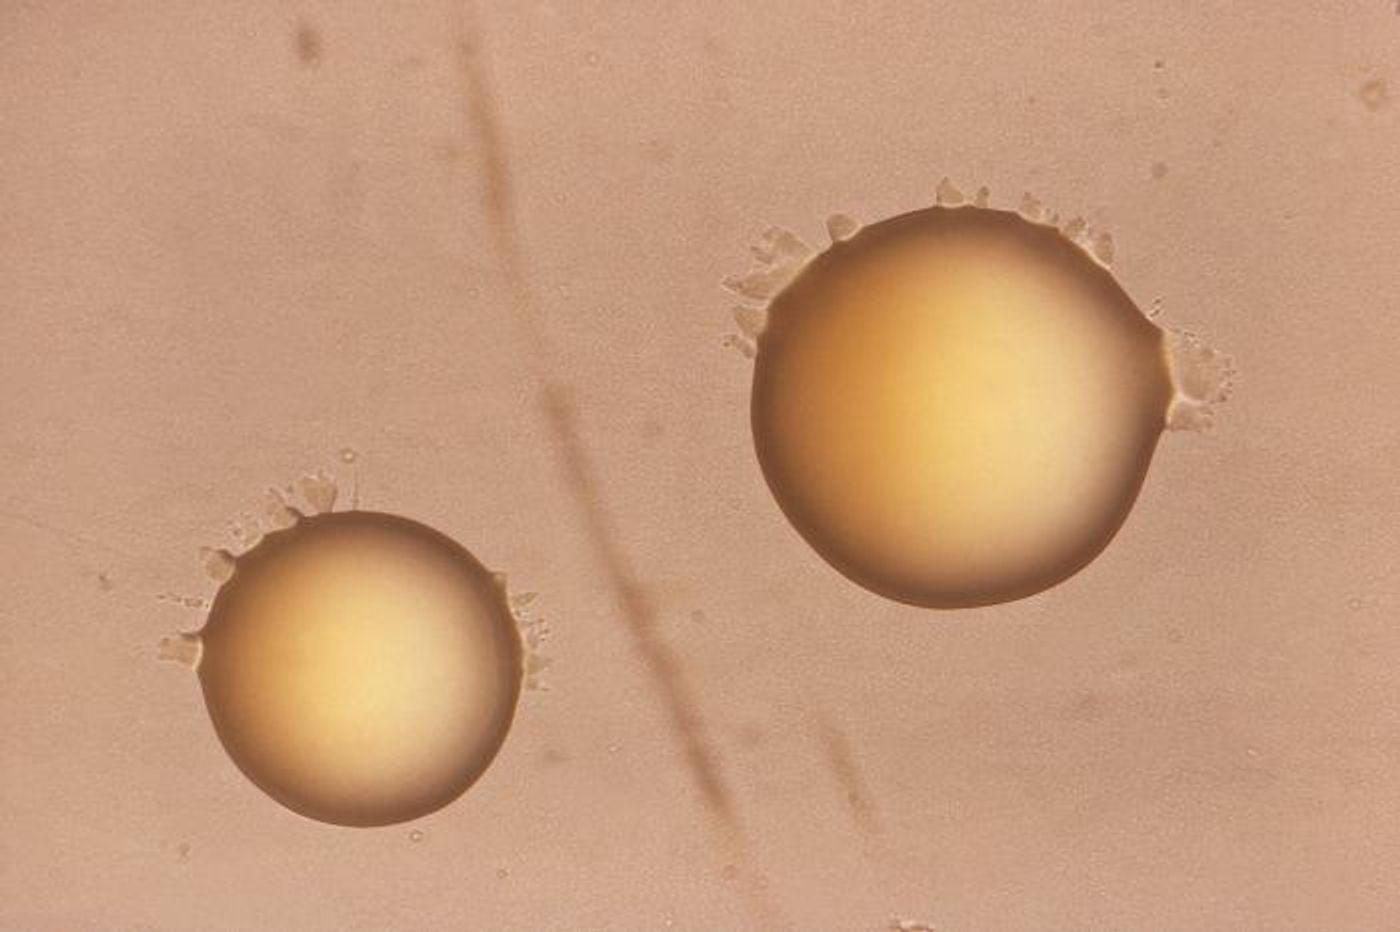 Two smooth, chromogenic colonies of Mycobacteria bacterial organisms / Credit: CDC/ Annie L. Vestal